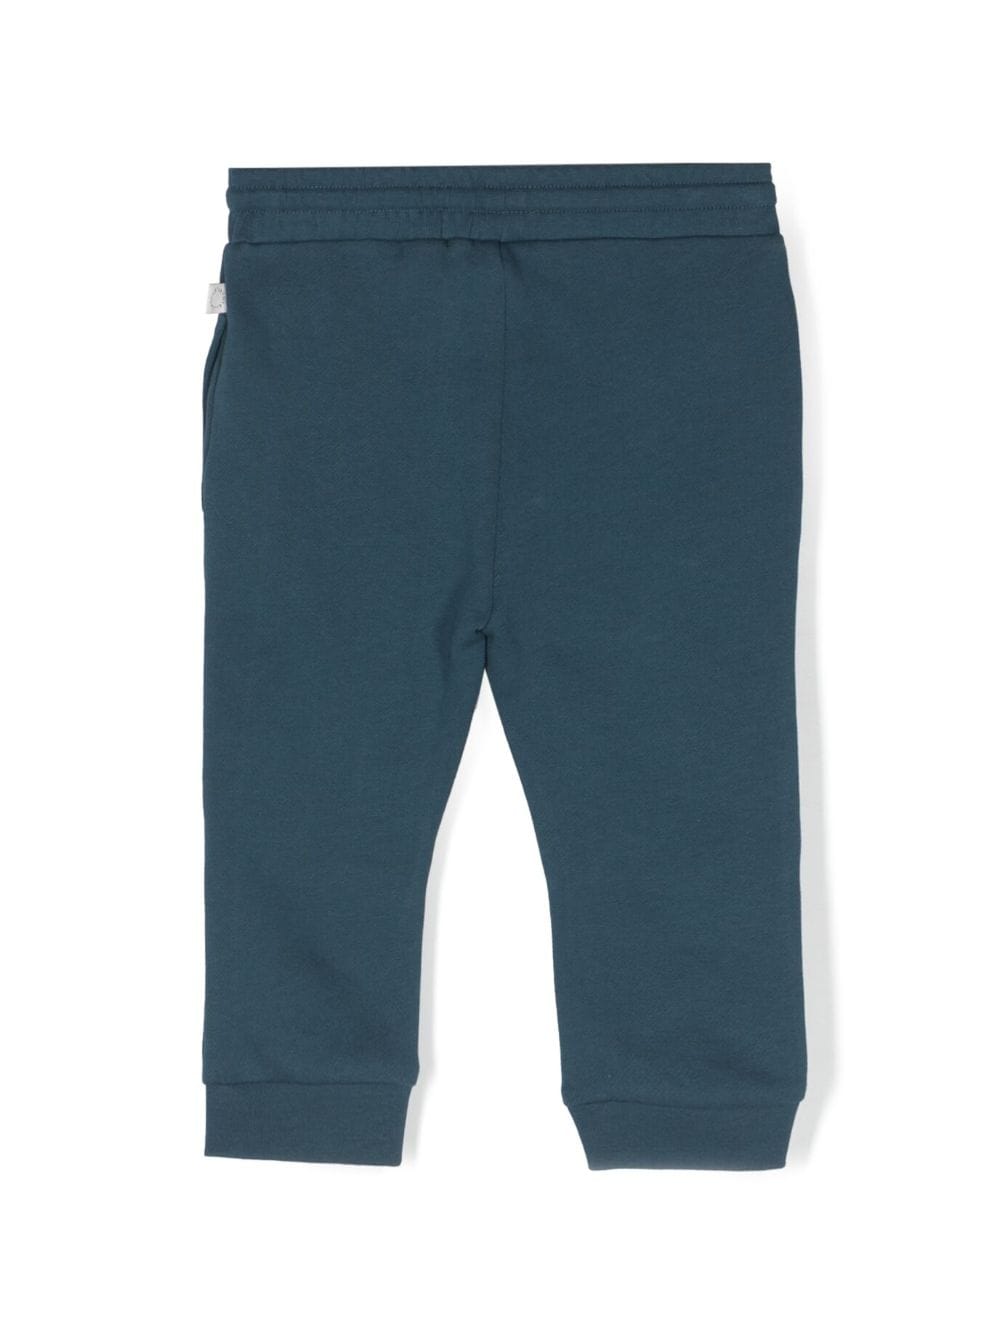 Blue sports trousers for newborns with print